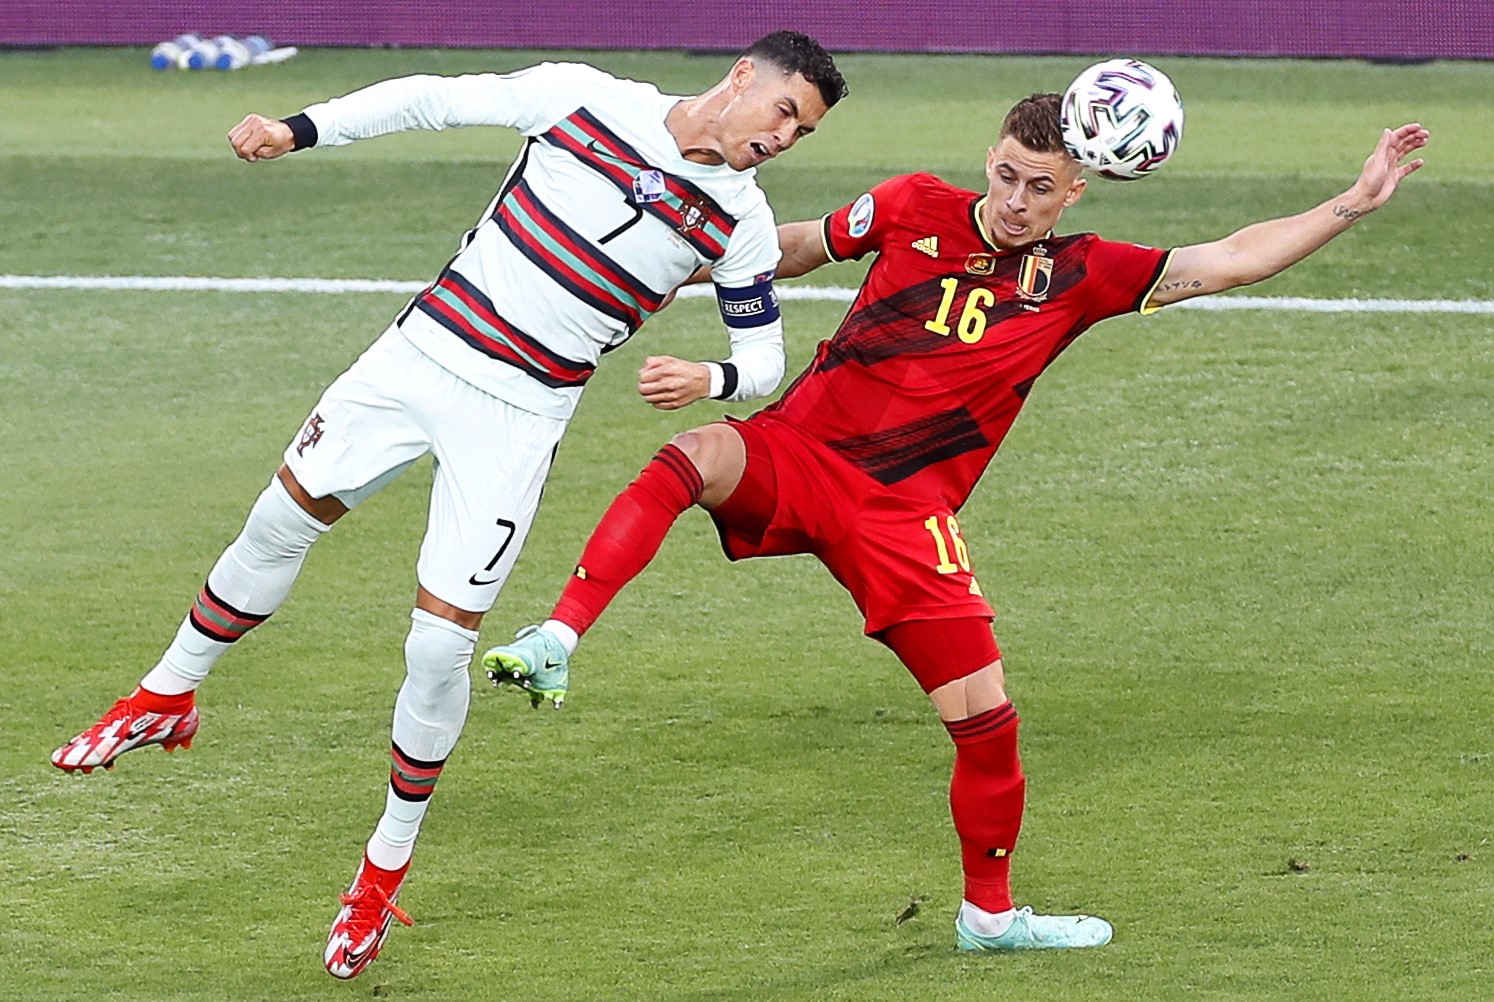 epa09306299 Thorgan Hazard (R) of Belgium in action against Cristiano Ronaldo (L) of Portugal during the UEFA EURO 2020 round of 16 soccer match between Belgium and Portugal in Seville, Spain, 27 June 2021.  EPA/Jose Manuel Vidal / POOL (RESTRICTIONS: For editorial news reporting purposes only. Images must appear as still images and must not emulate match action video footage. Photographs published in online publications shall have an interval of at least 20 seconds between the posting.)